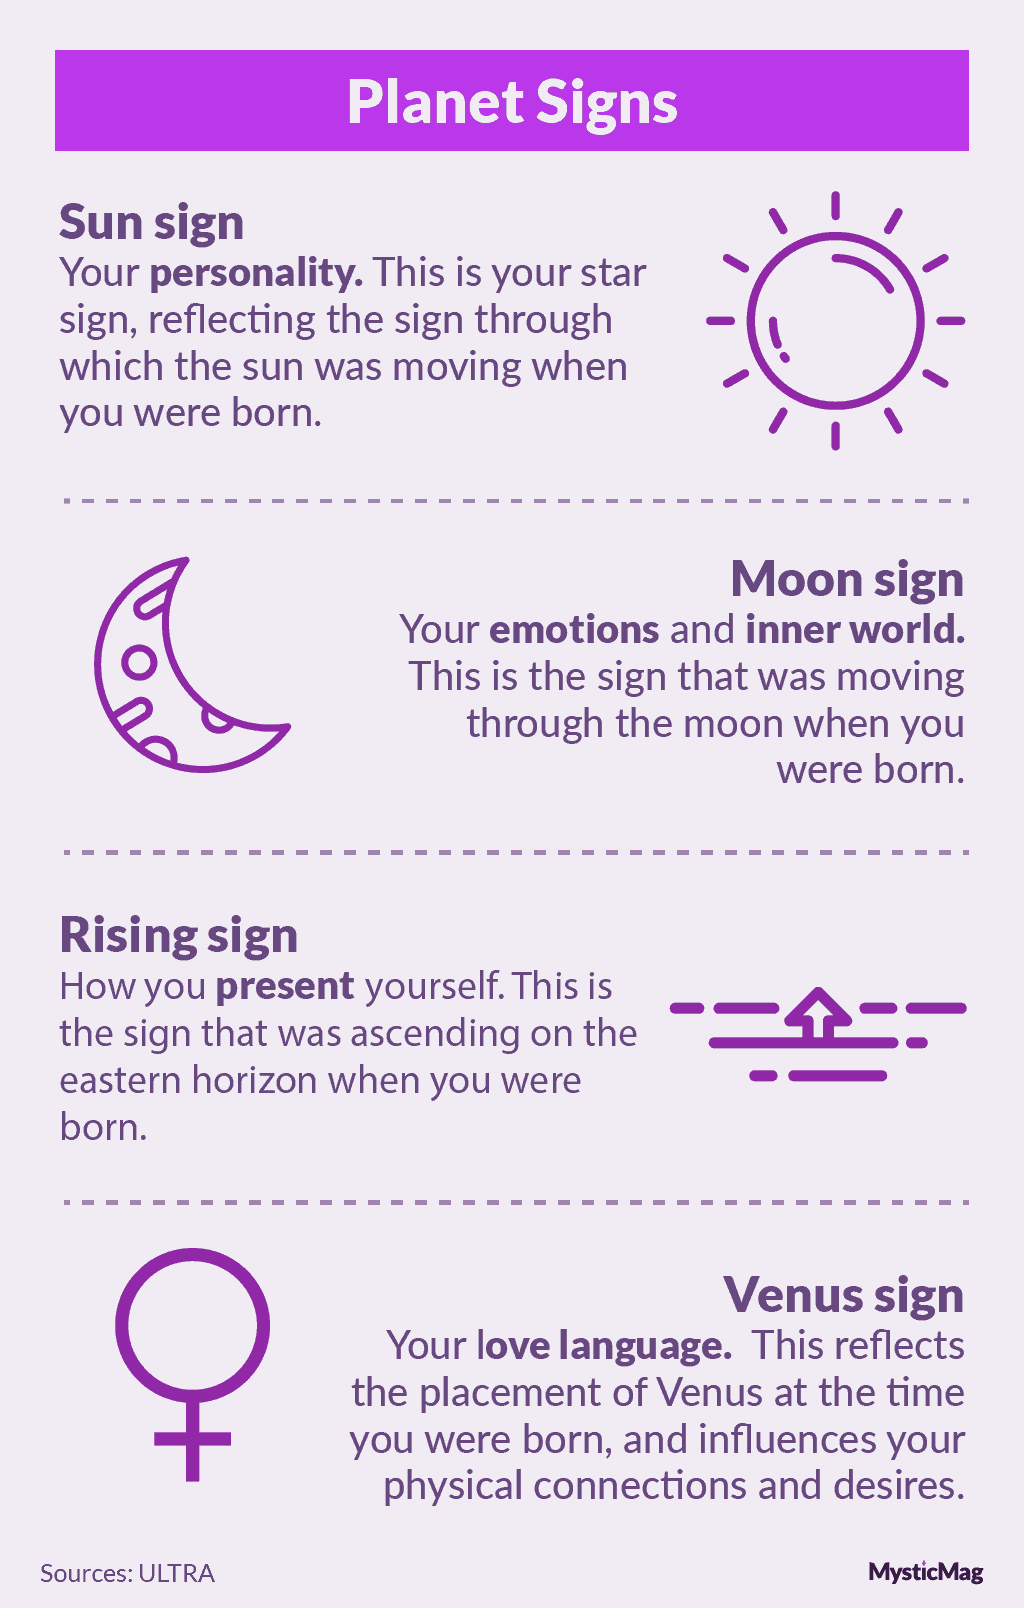 Using Planet Signs to Predict Compatibility